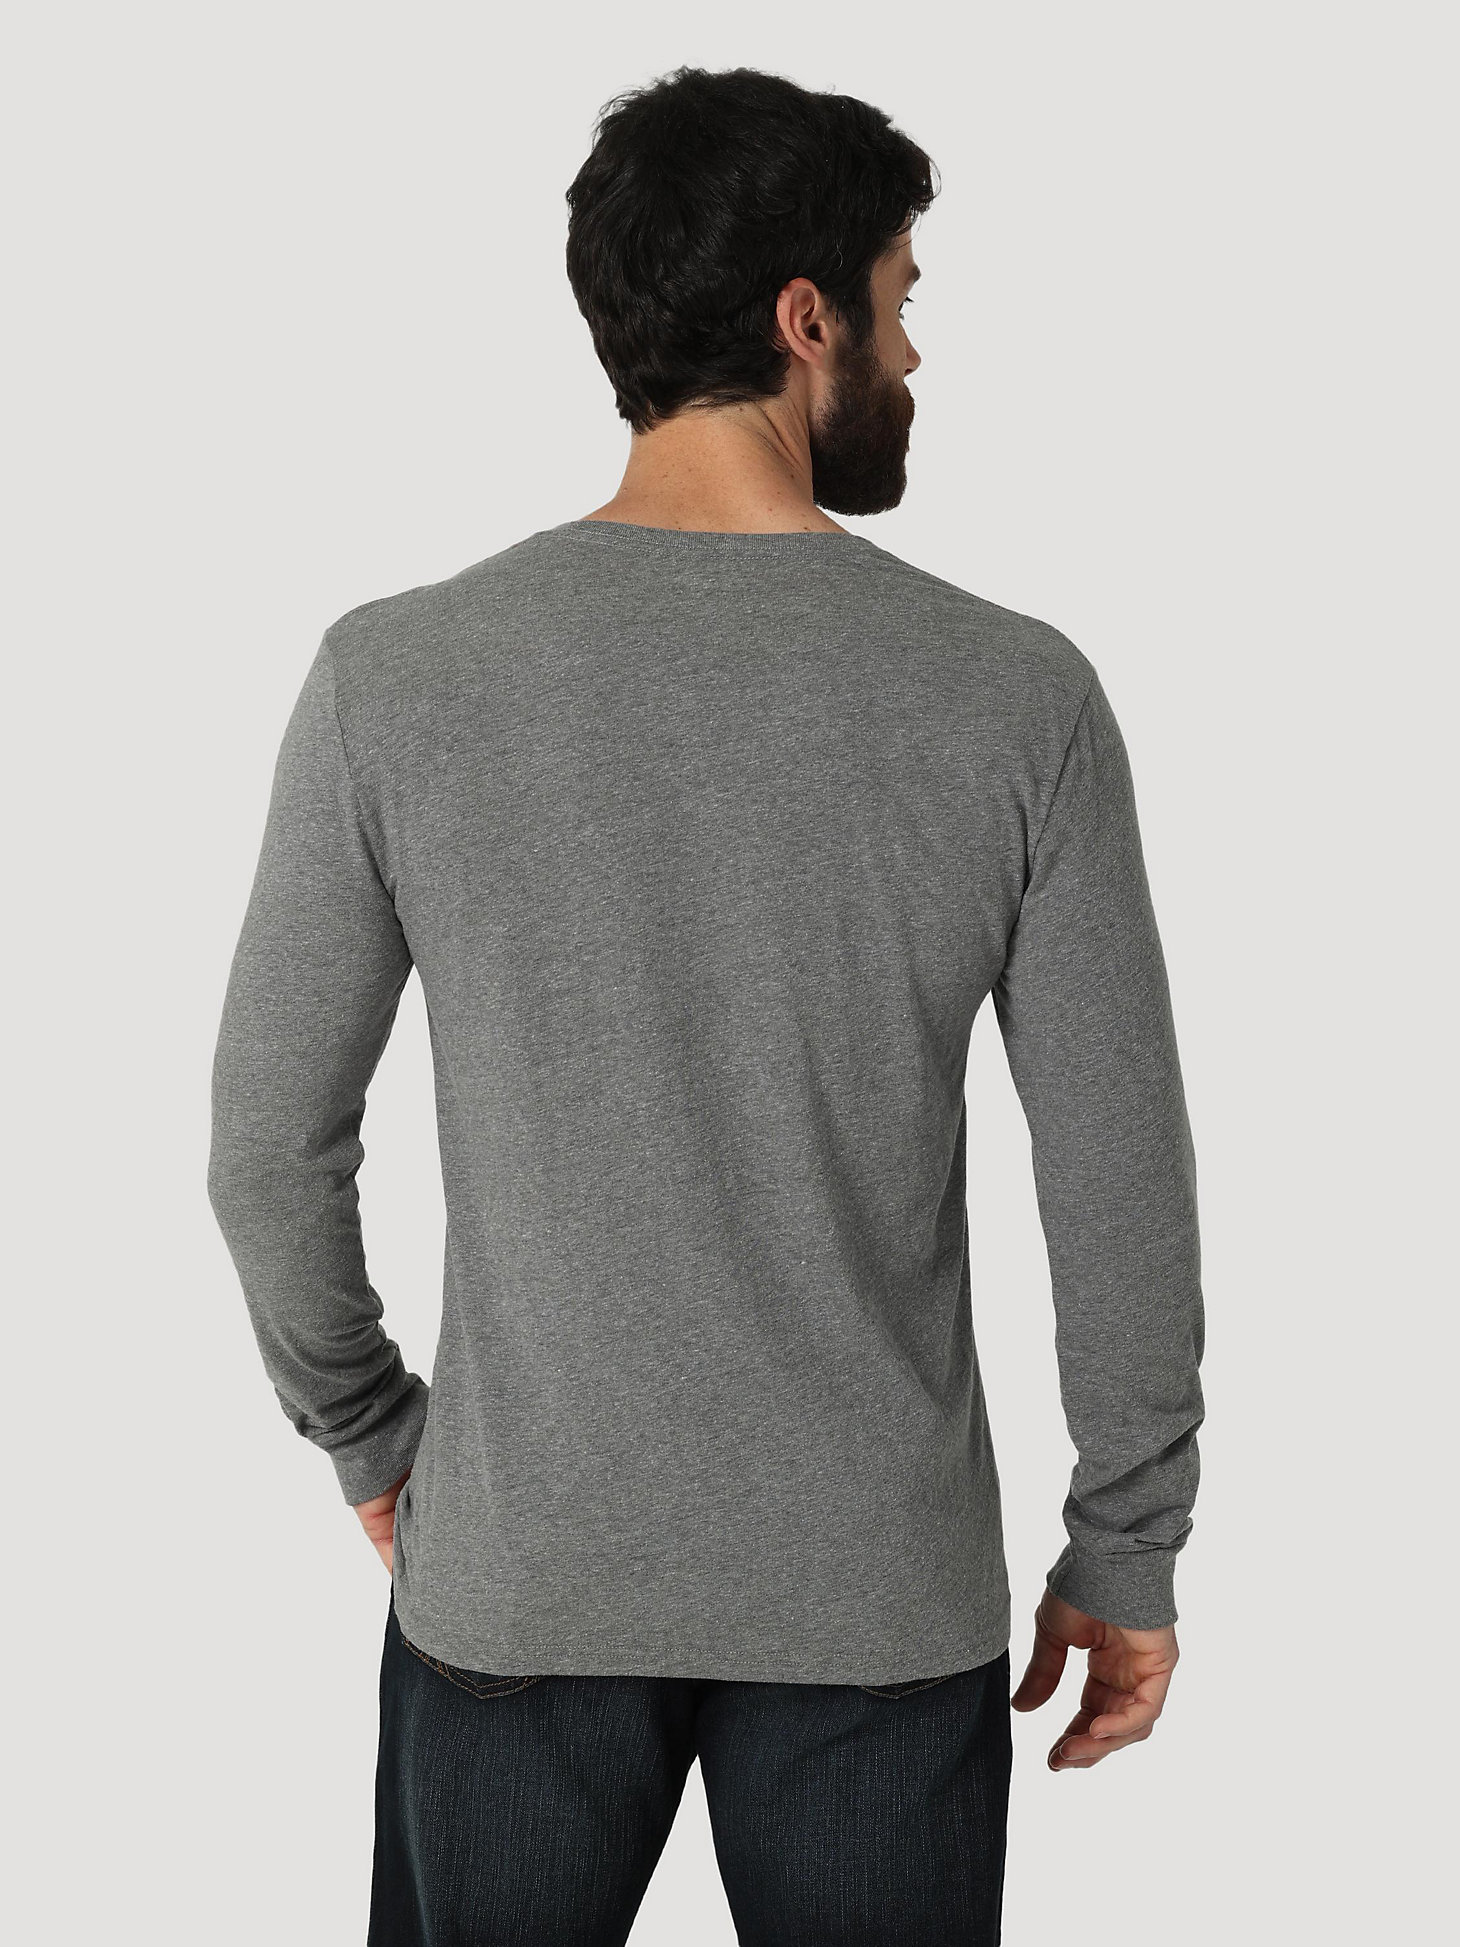 Men's Long Sleeve Authentic Western Jeans Graphic T-Shirt in Graphite Heather alternative view 2